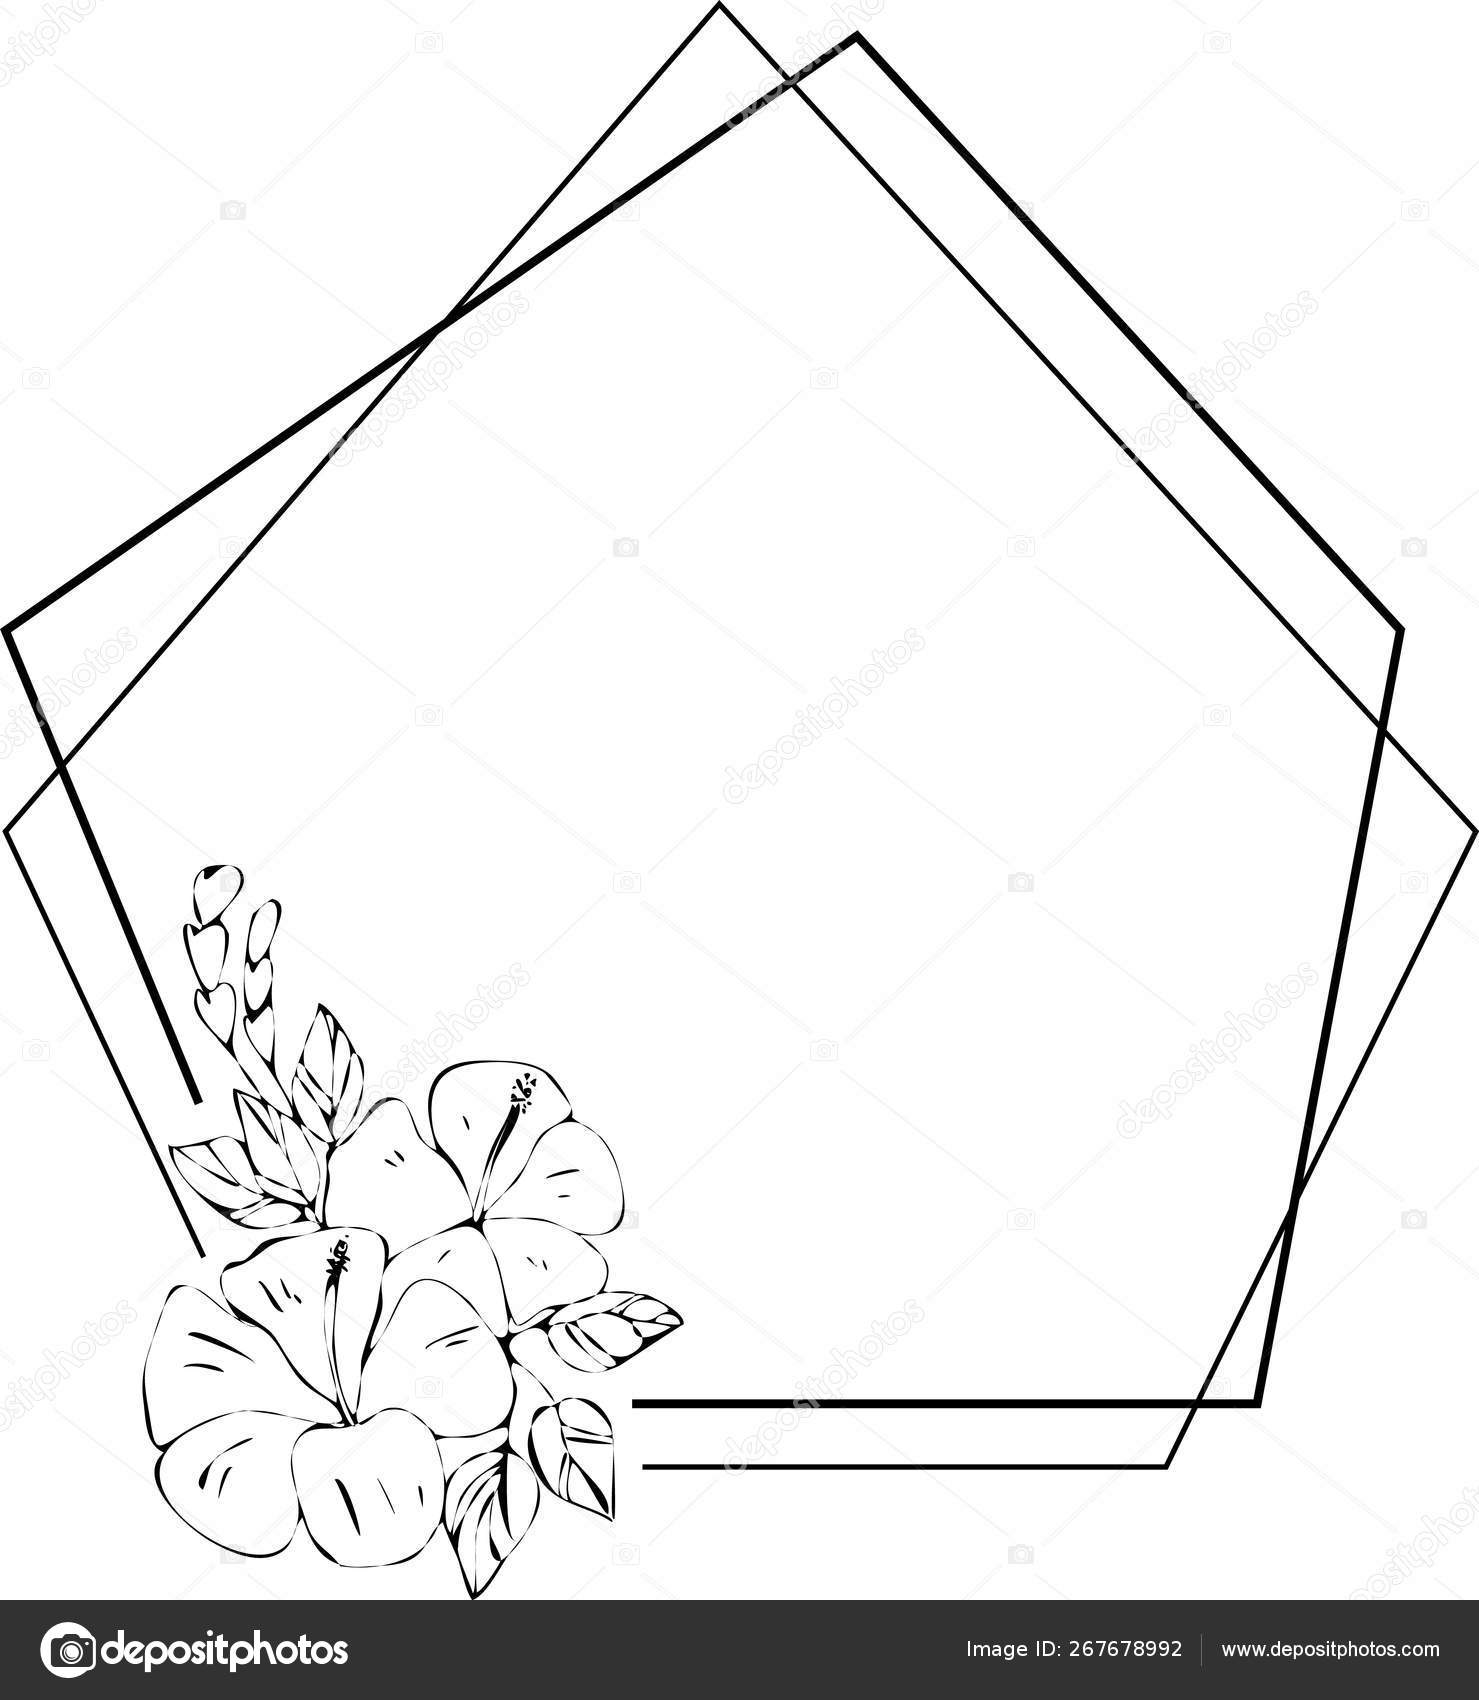 Flowers Frame Flowers Drawing And Sketch With Line Art On White Backgrounds Vector Image By C Harbacheuskaya Vector Stock